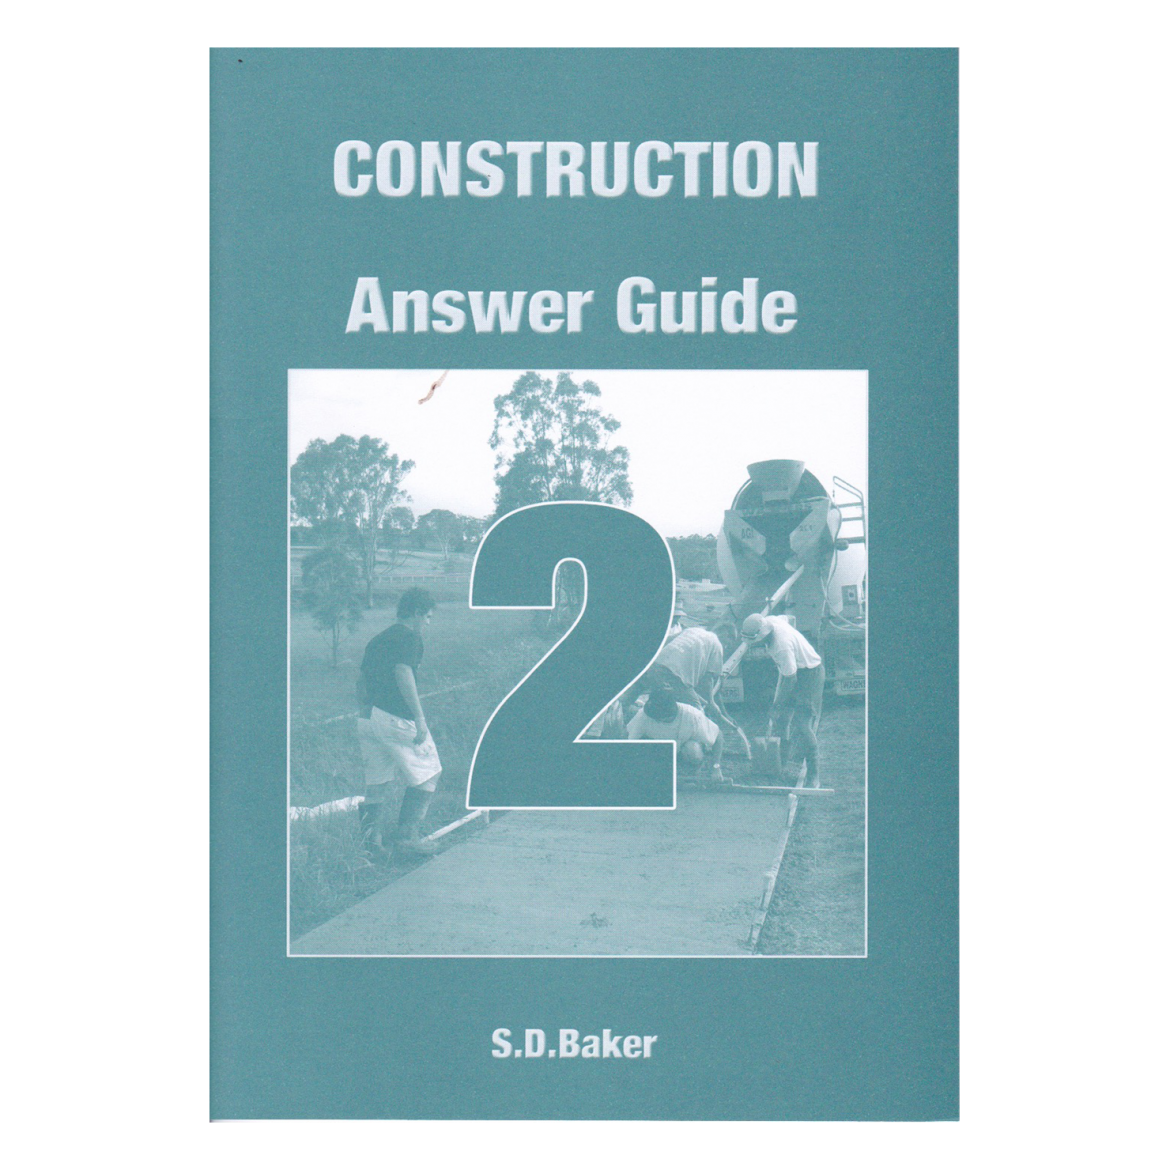 GENERAL-CONSTRUCTION-Answer-Guide-2.png